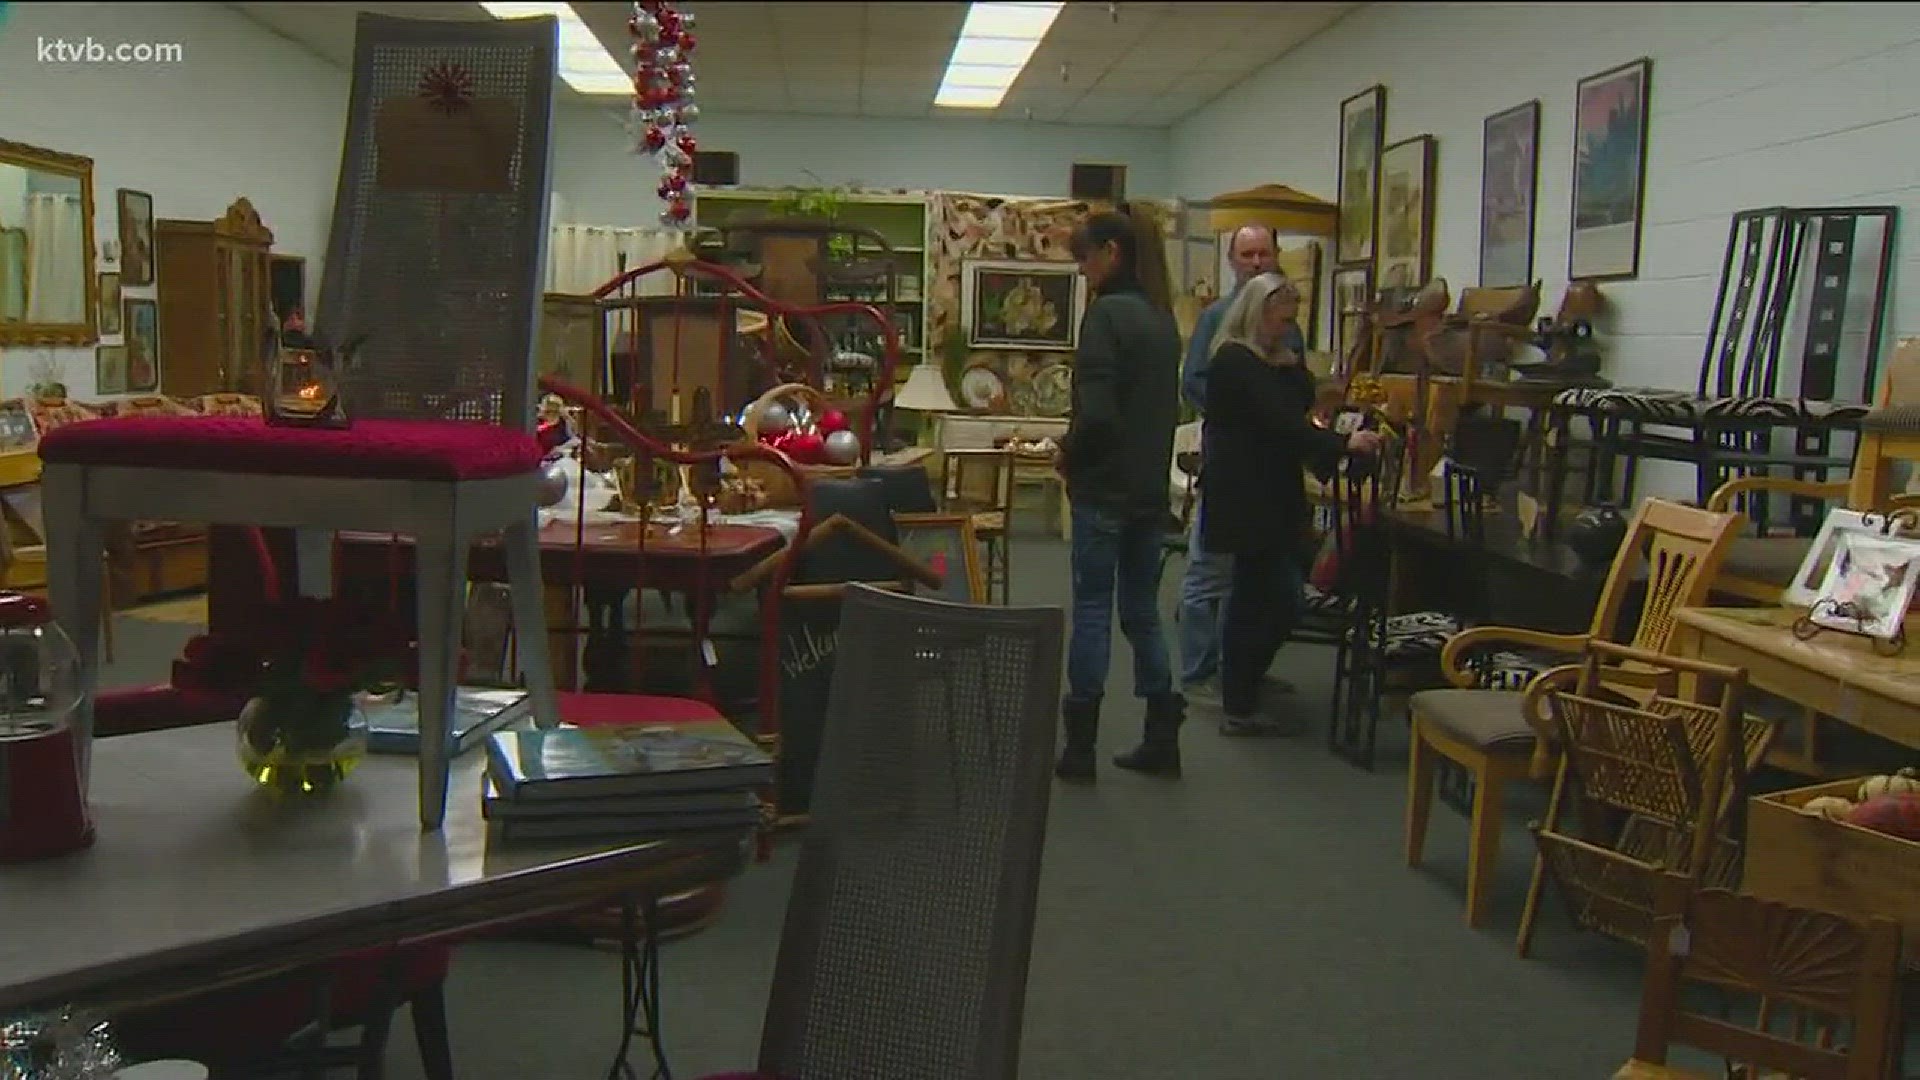 Hollywood film star Steve McQueen's widow has opened up a store in Boise where she's selling some of his belongings.